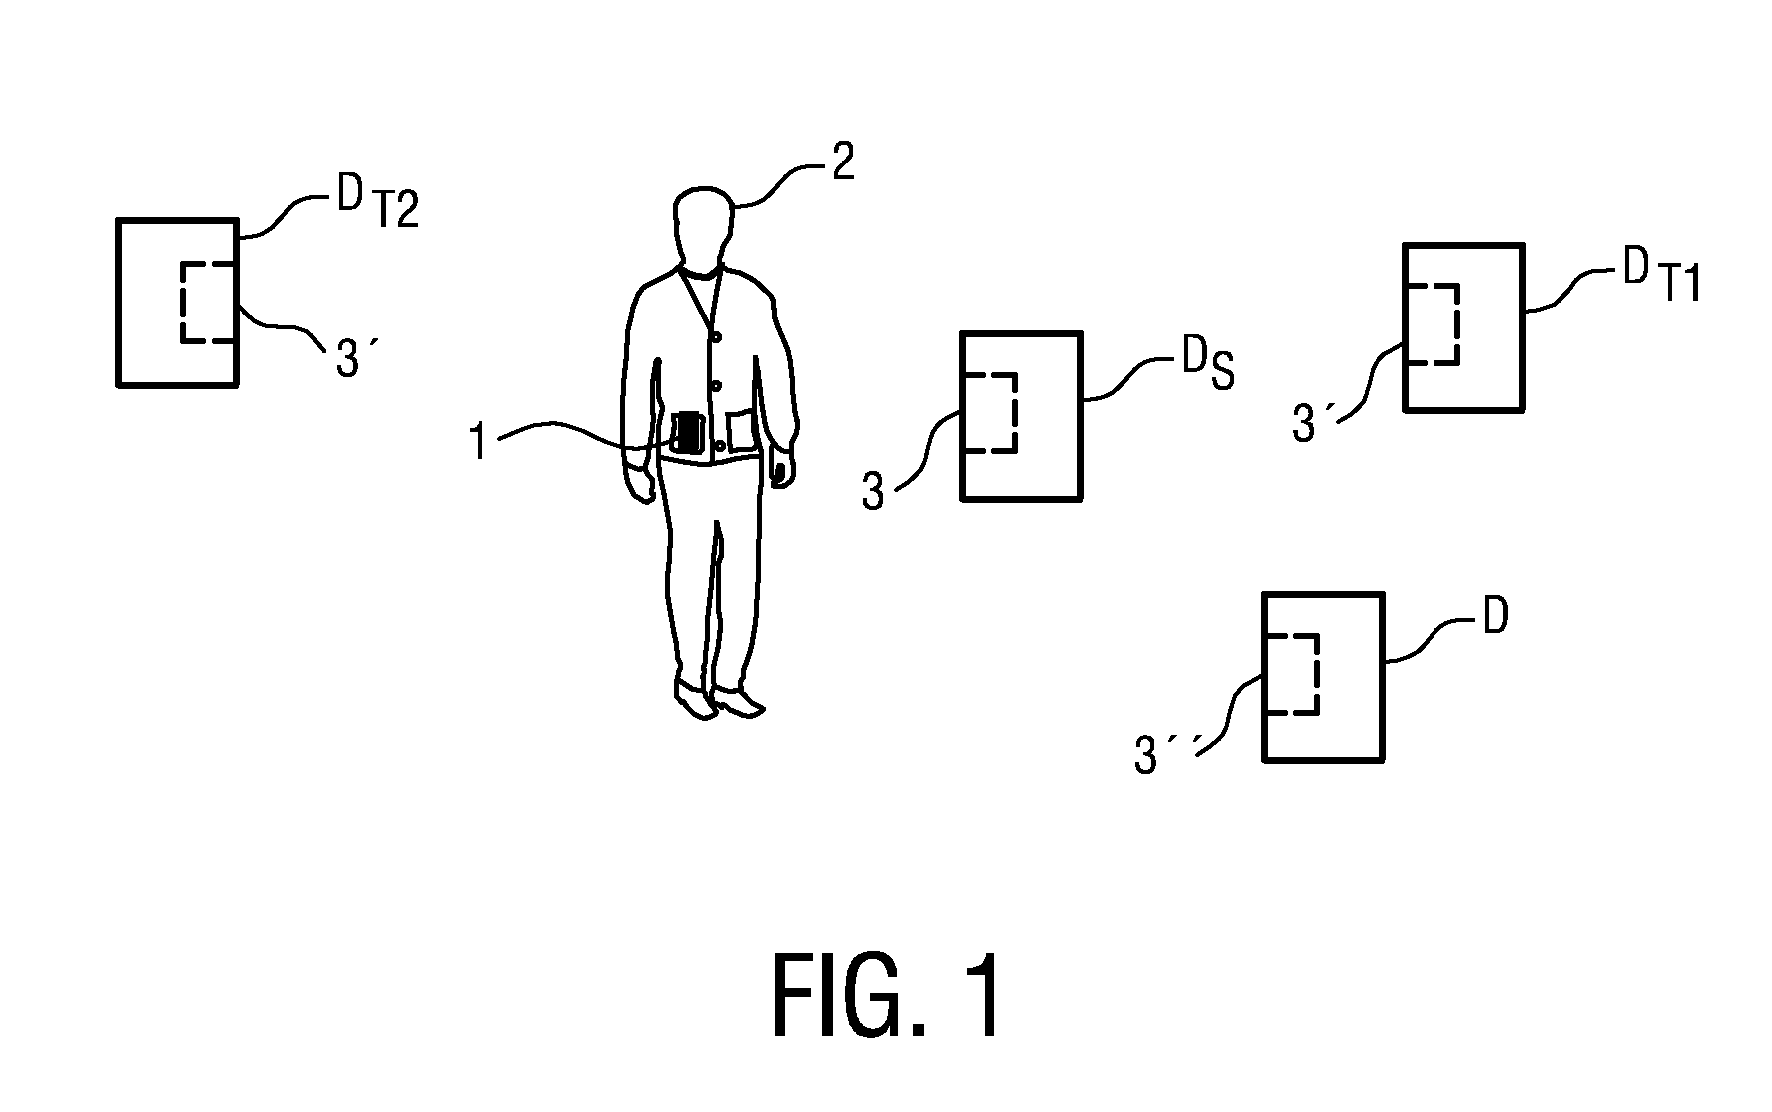 Method of transferring application data from a first device to a second device, and a data transfer system